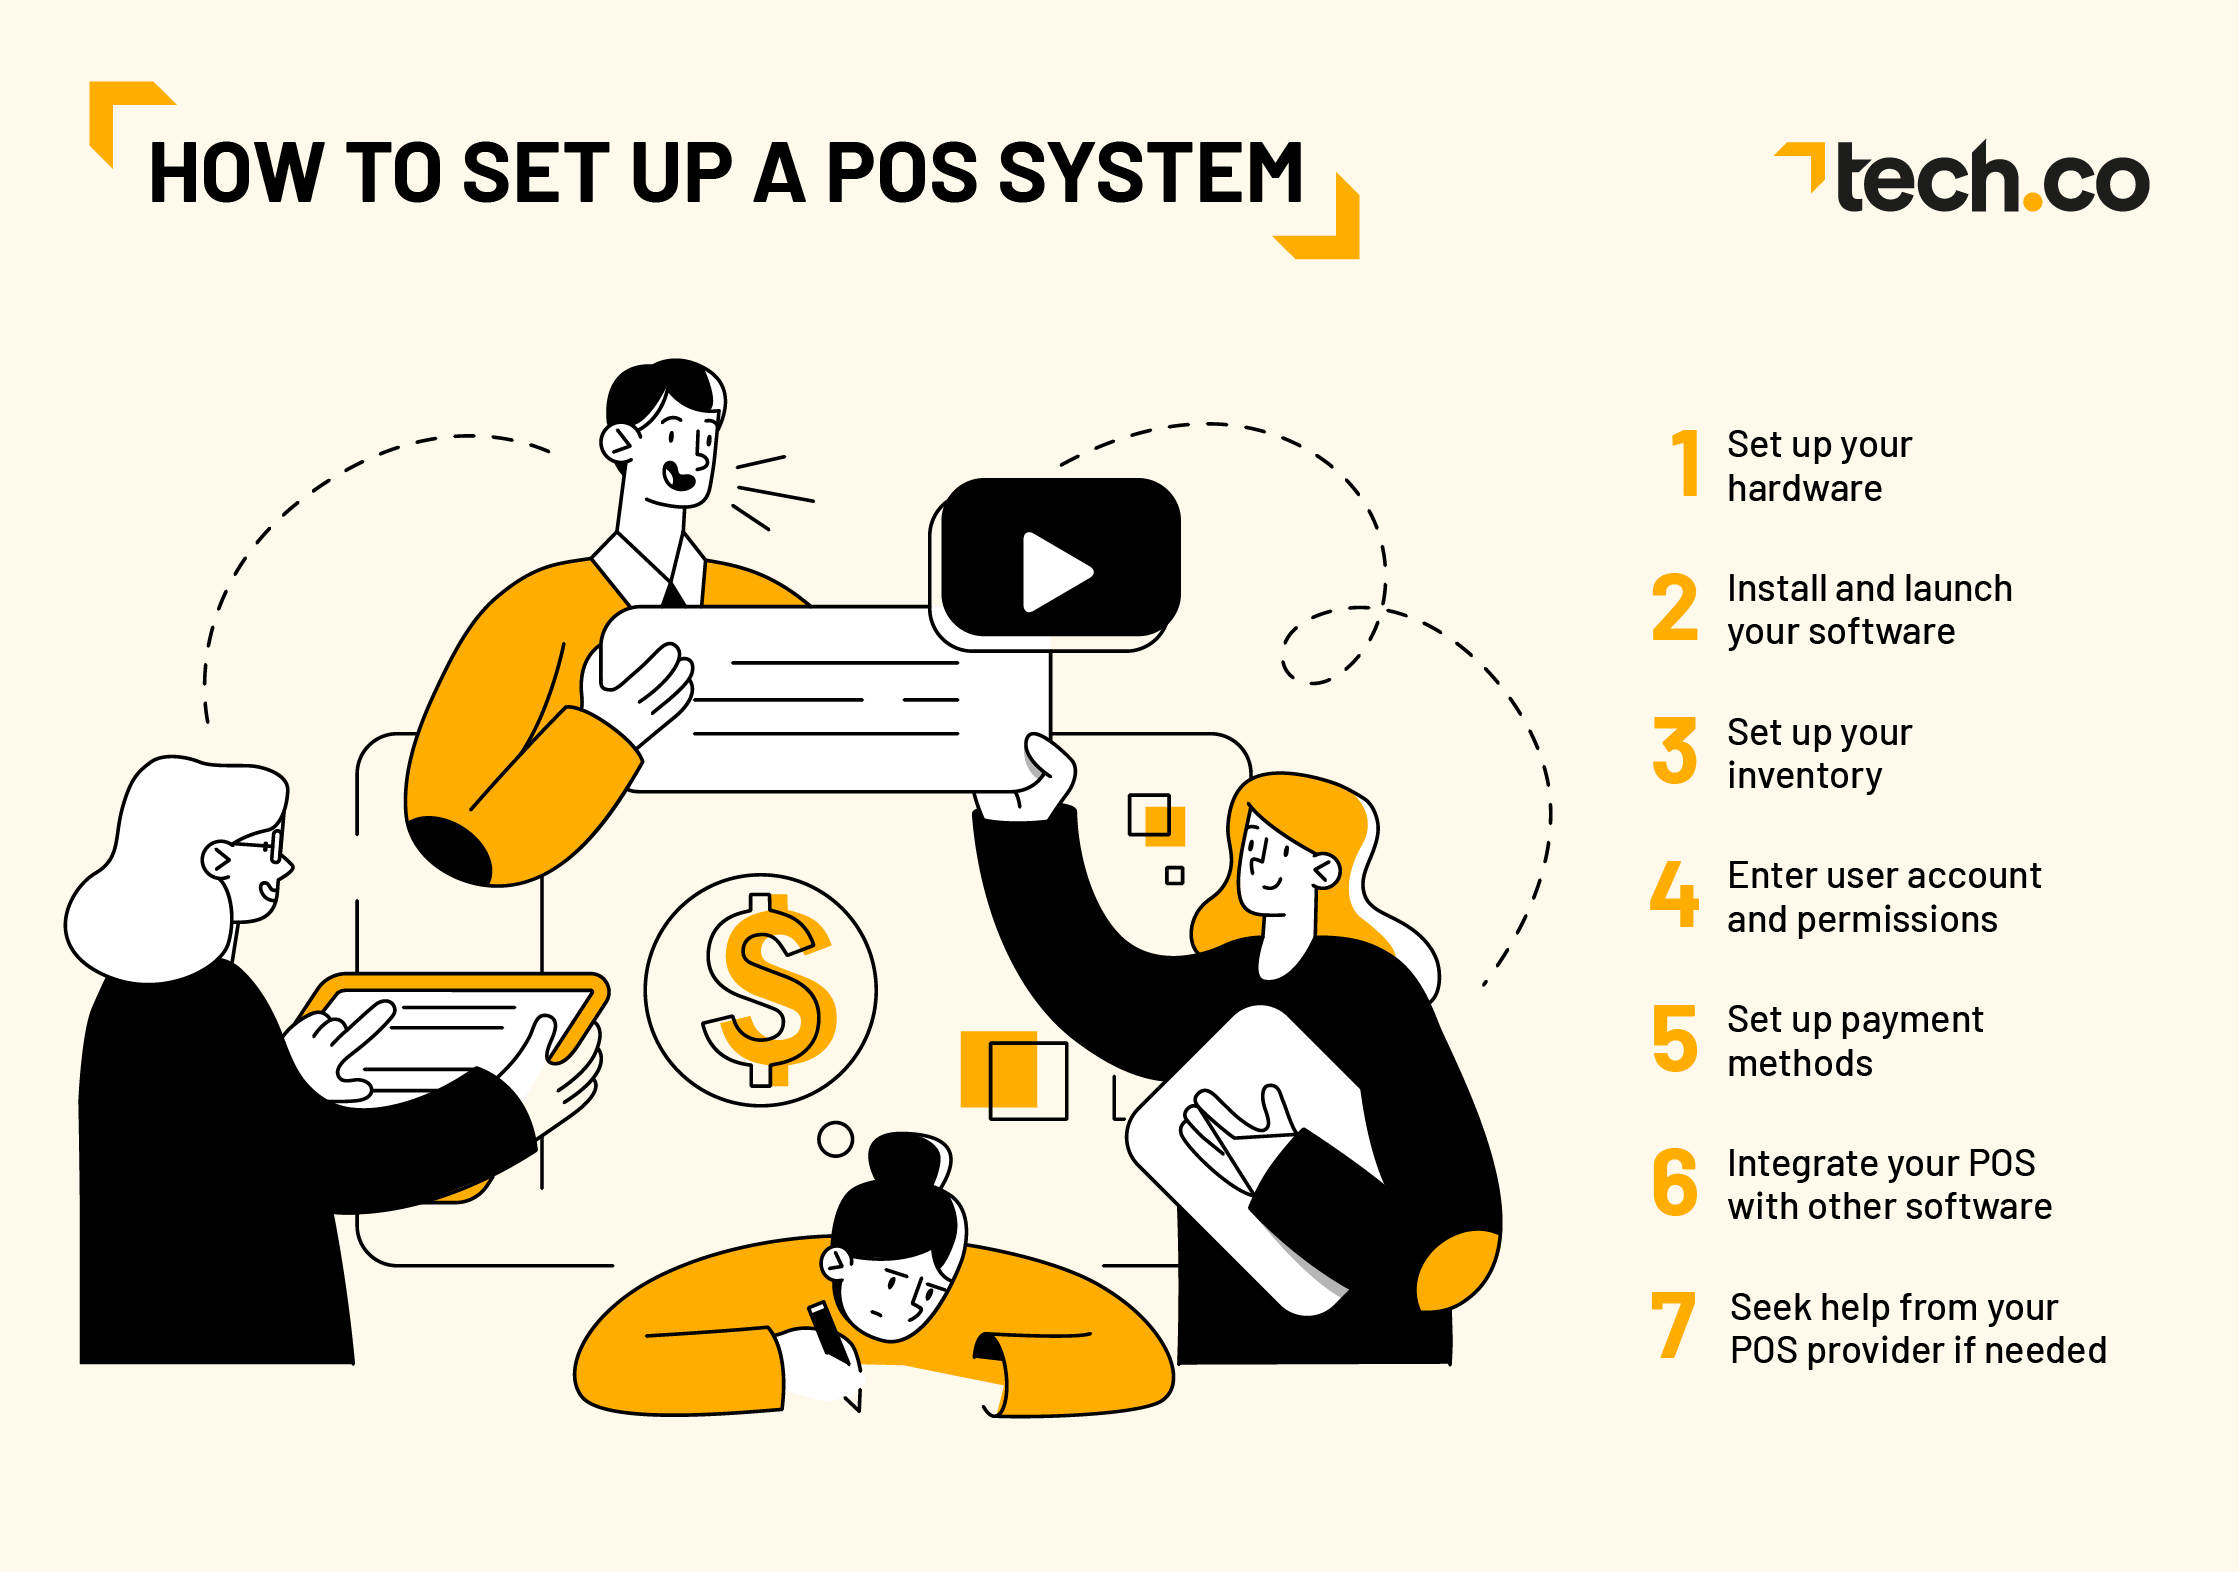 how to set up a POS system graphic